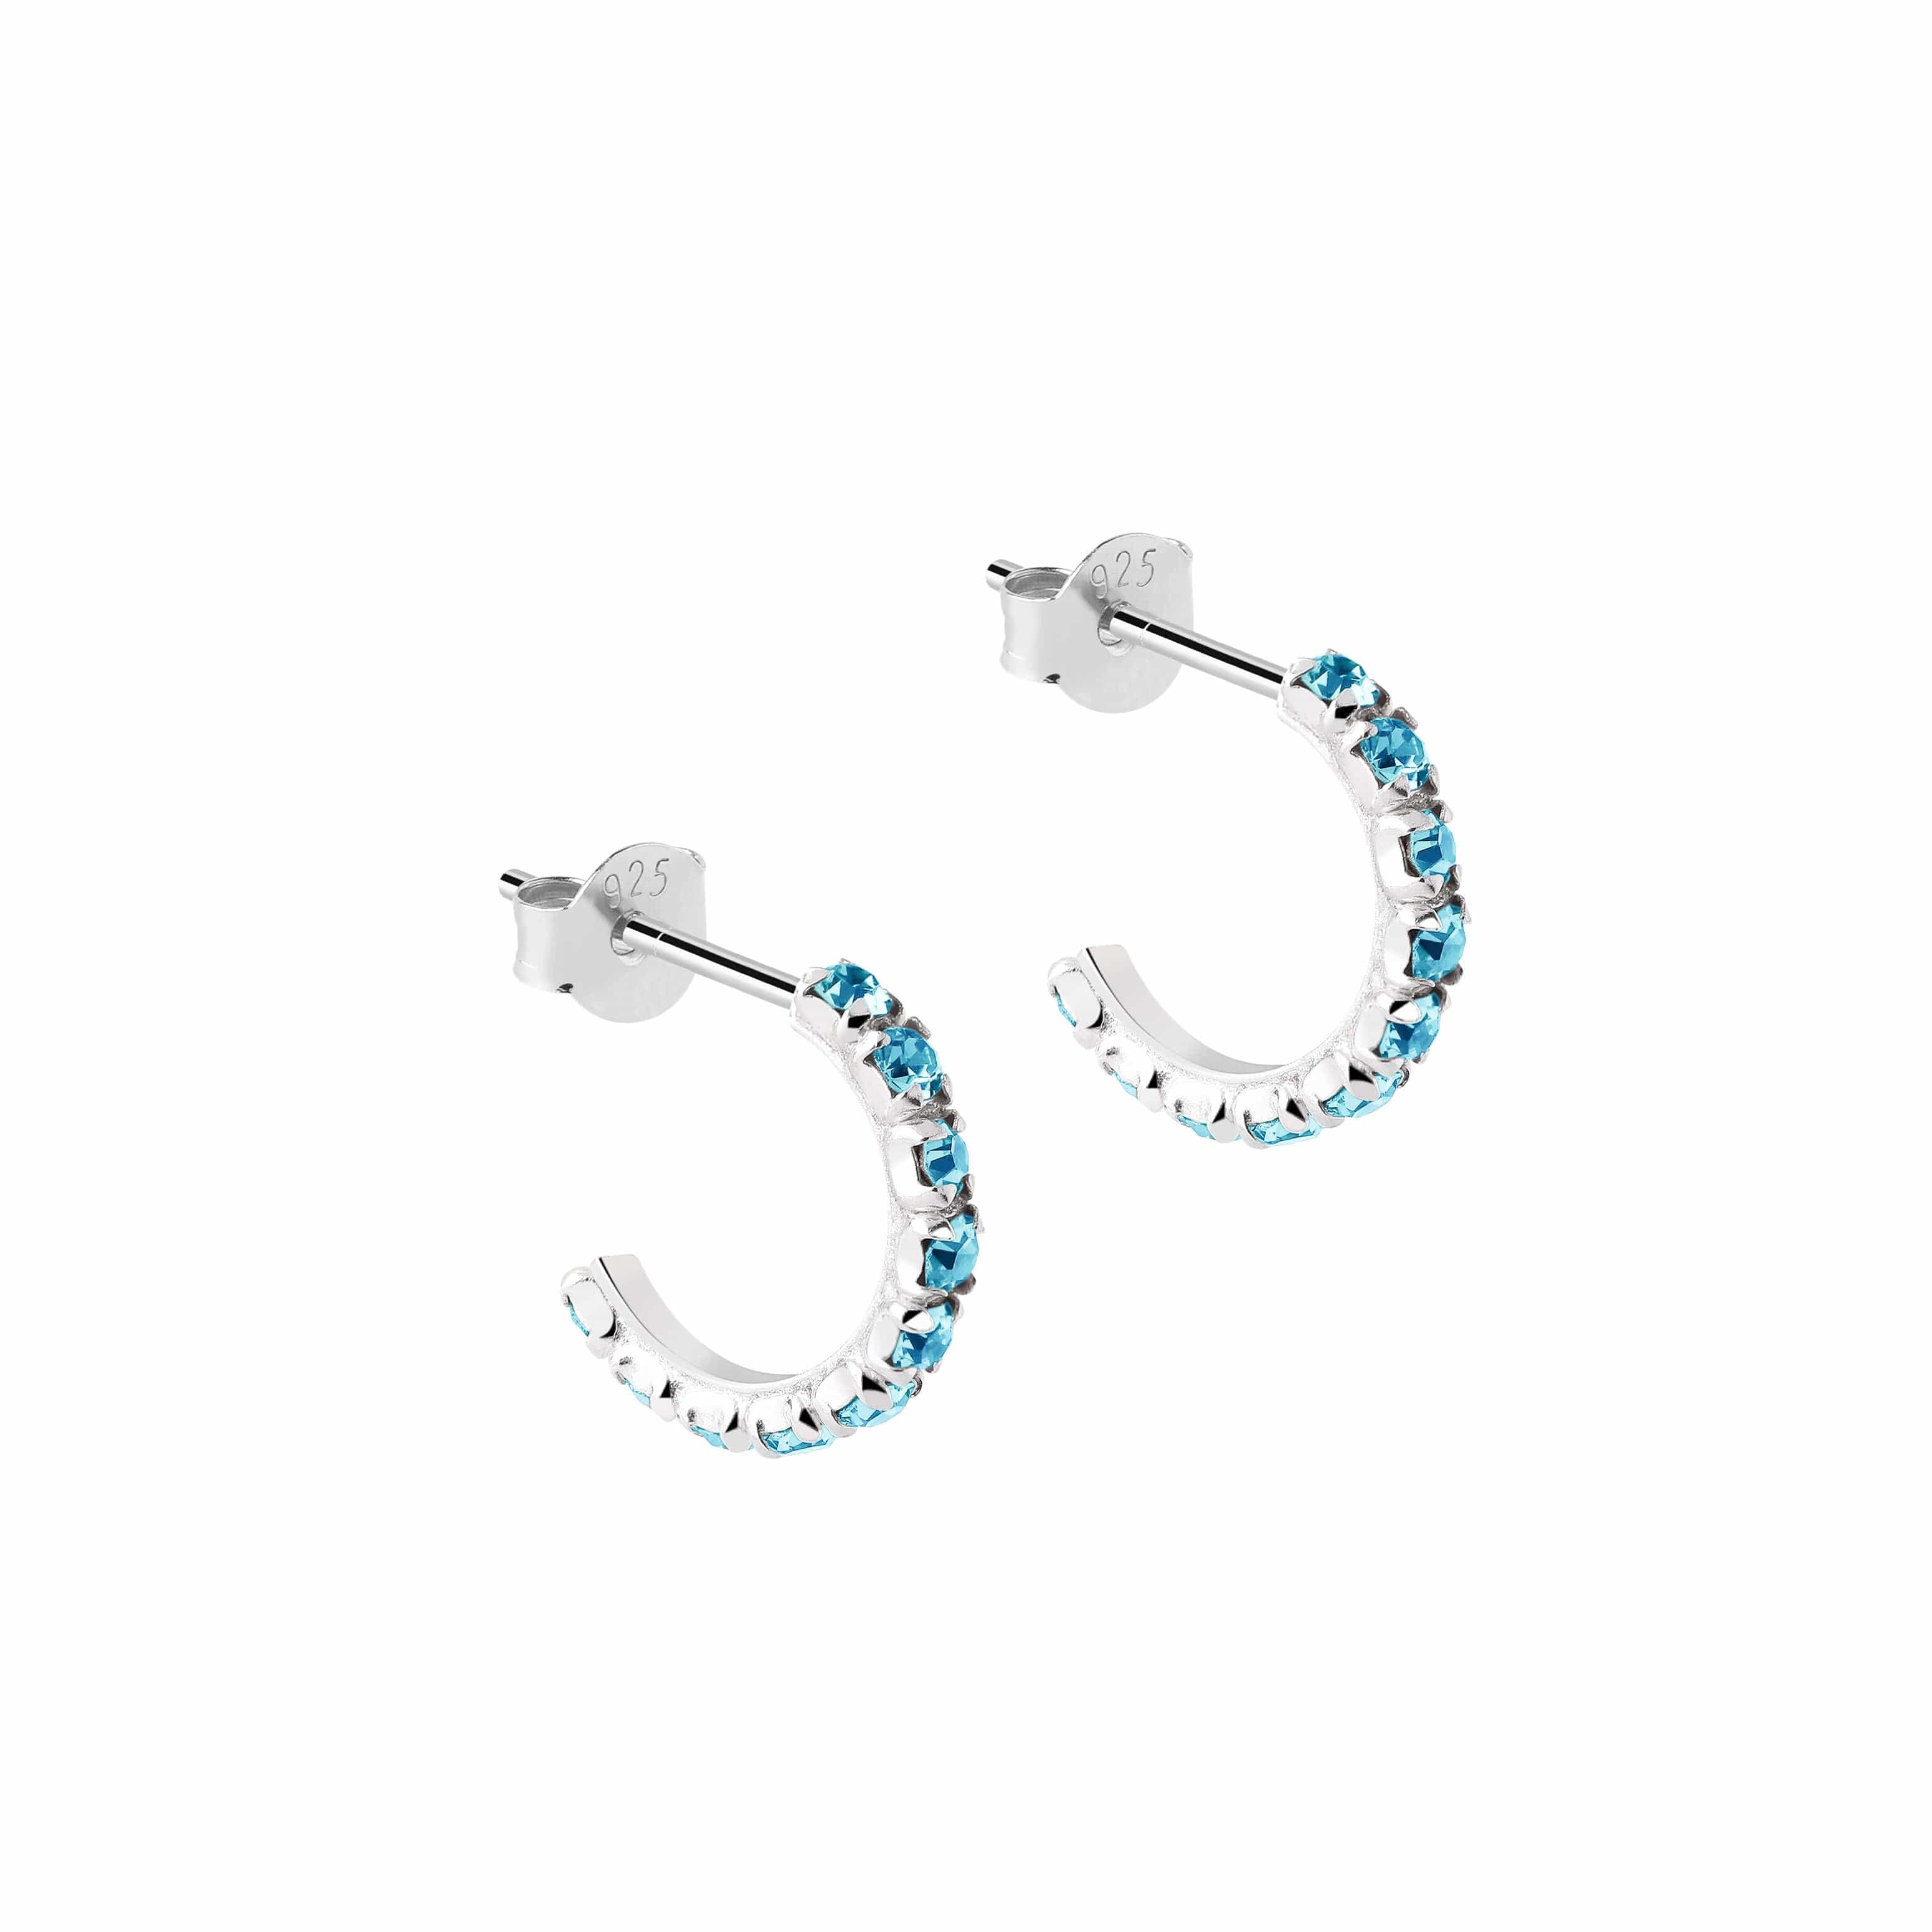 Single Round Sterling Silver Hoop Earring | Mostly Sweet Jewelry